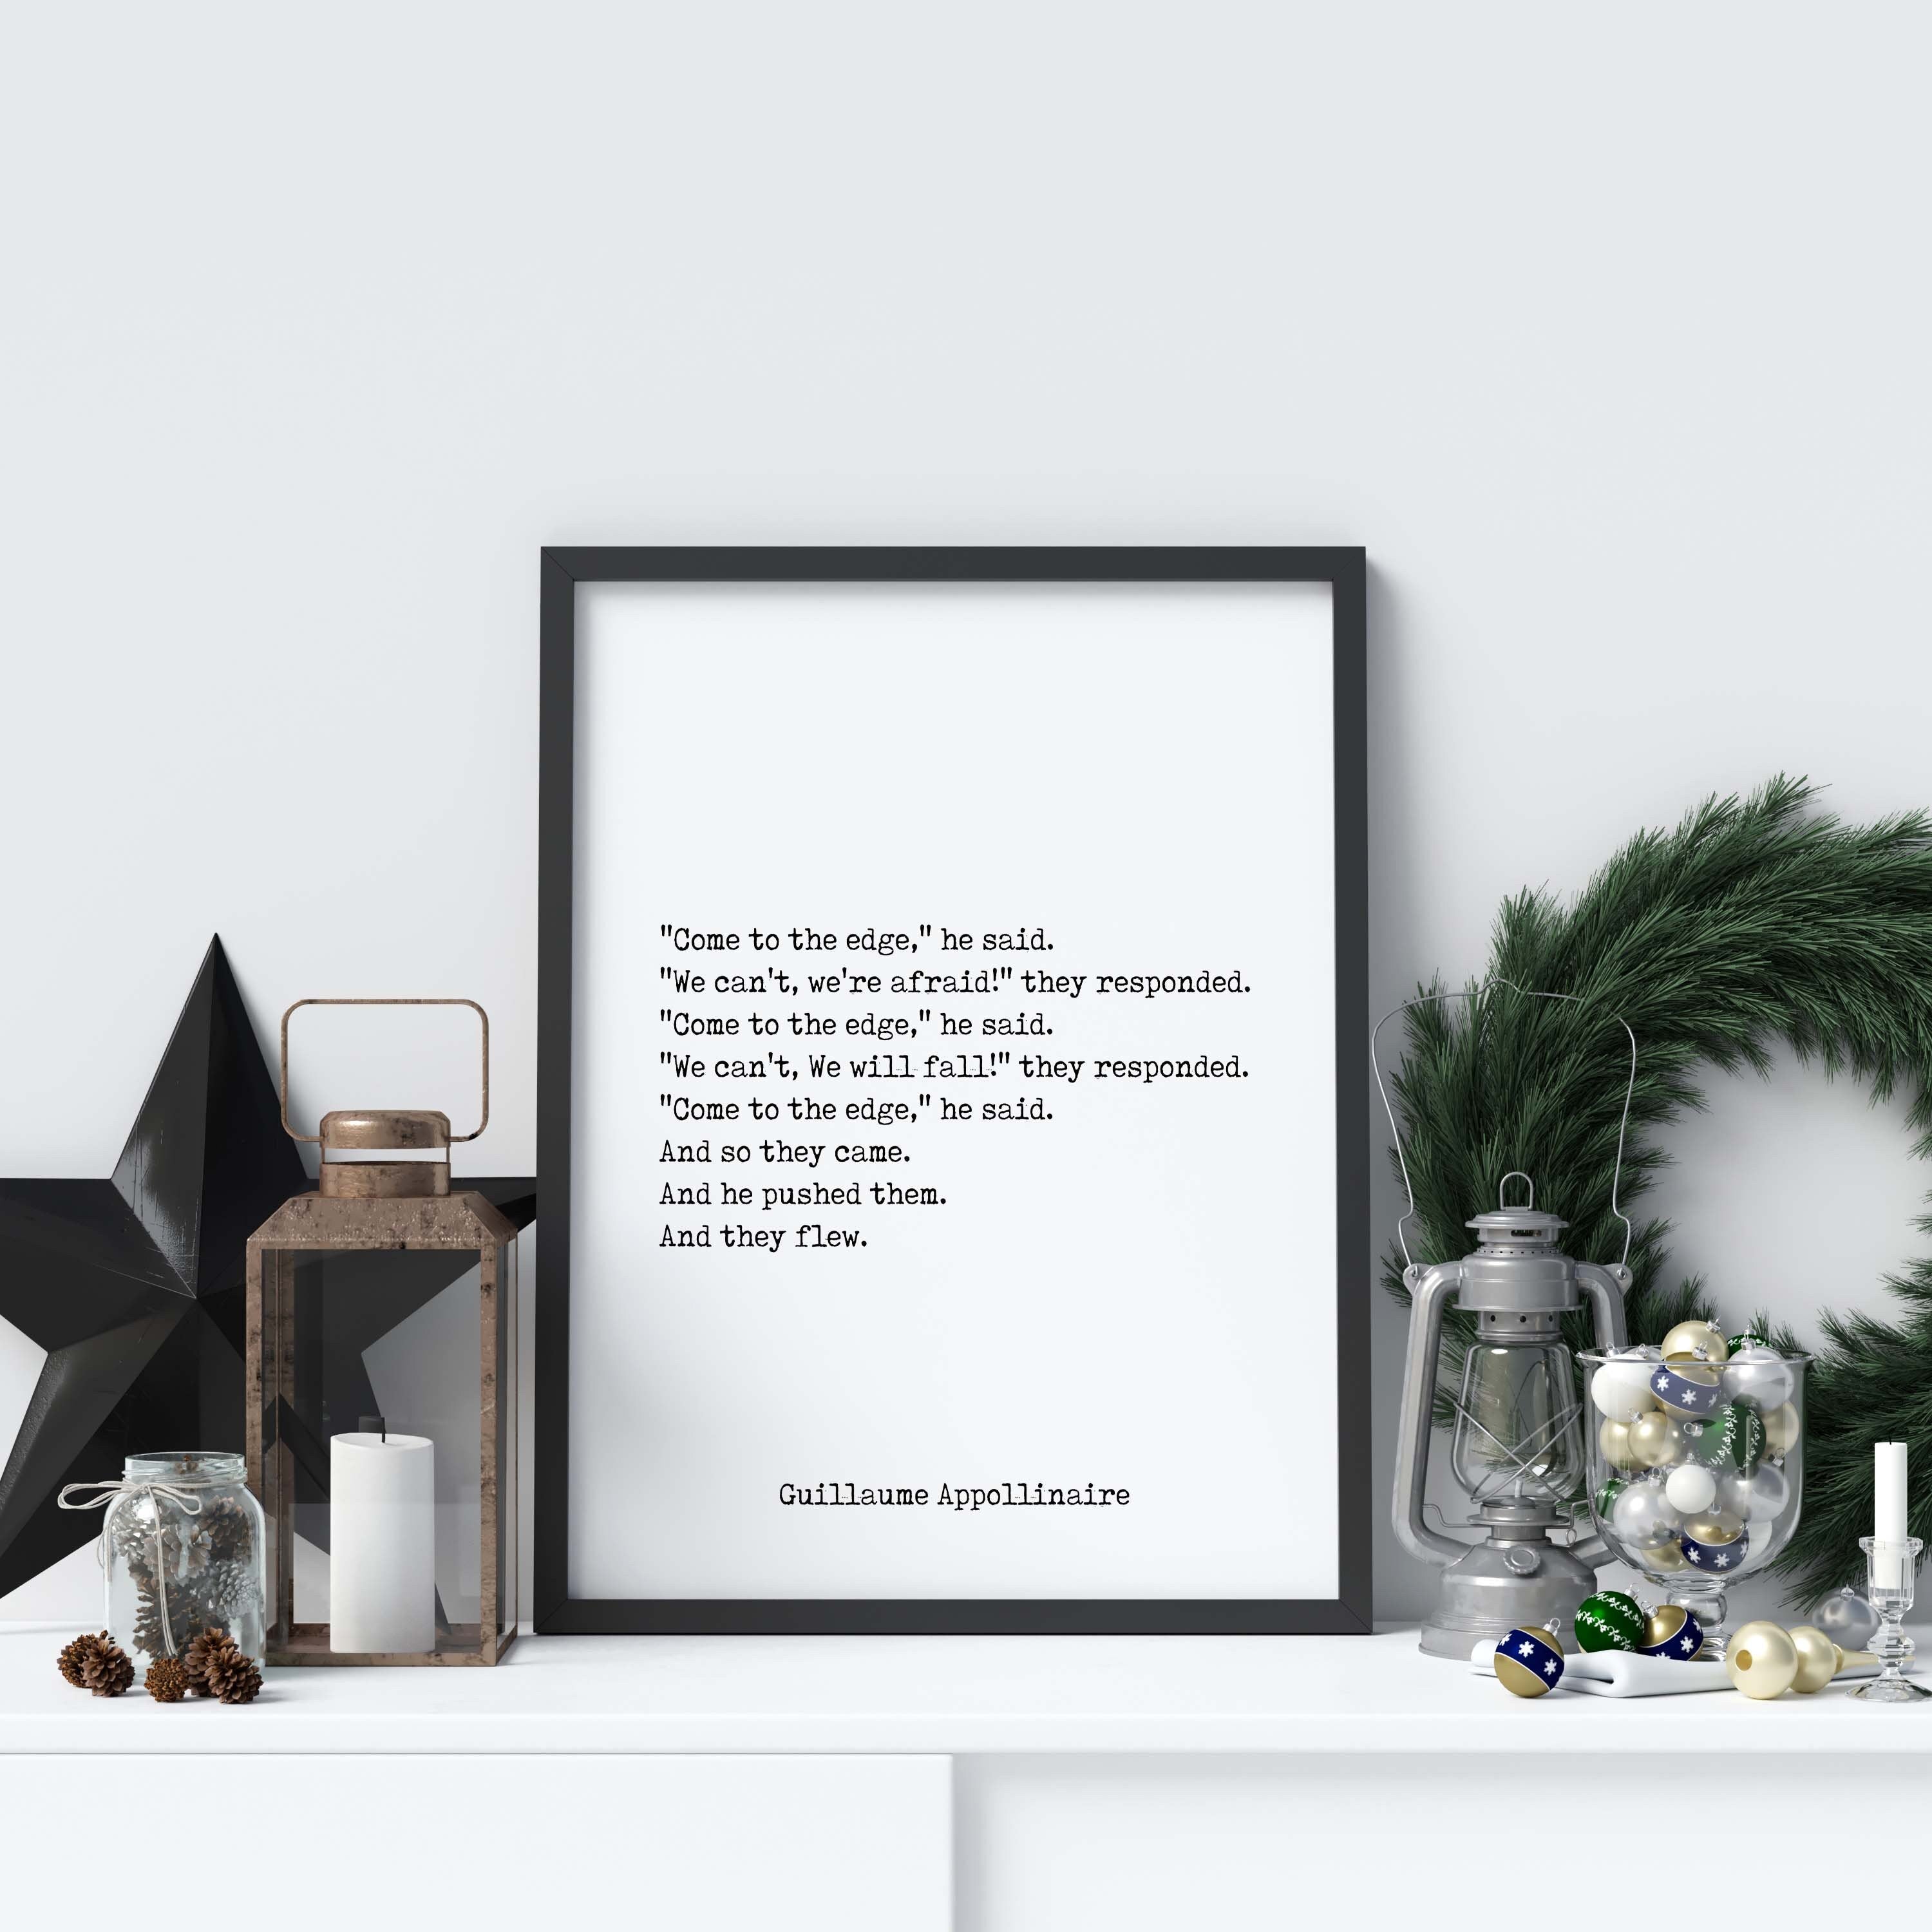 Guillaume Apollinaire Inspirational Print, Come To The Edge